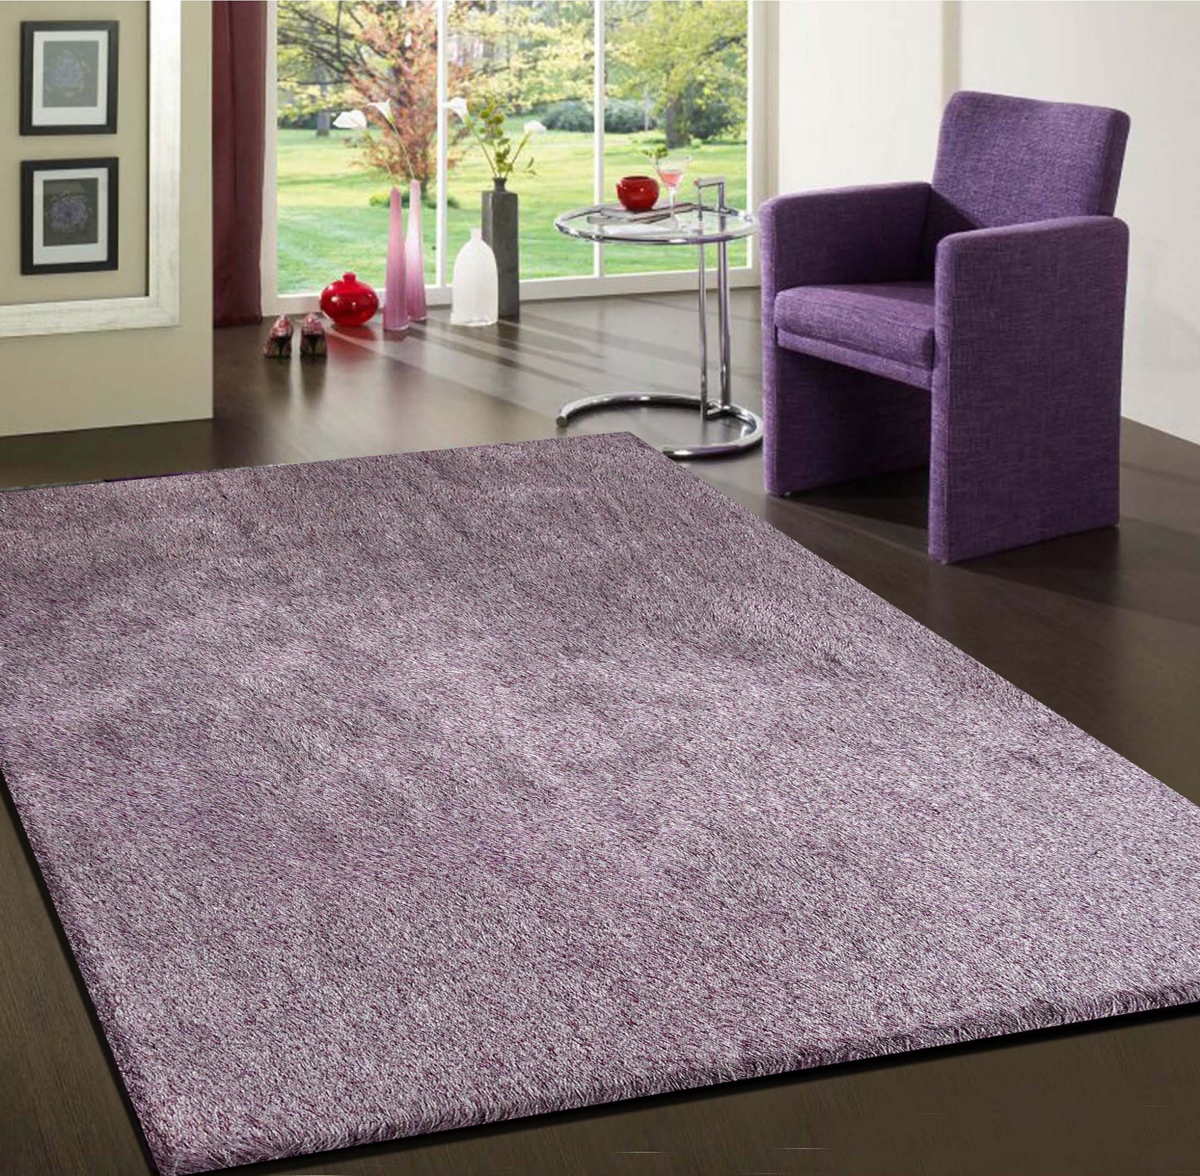 Picture of Amazing Rugs NL1005-57 5 x 7 ft. Fancy Shaggy Hand Tufted Area Rug in Purple